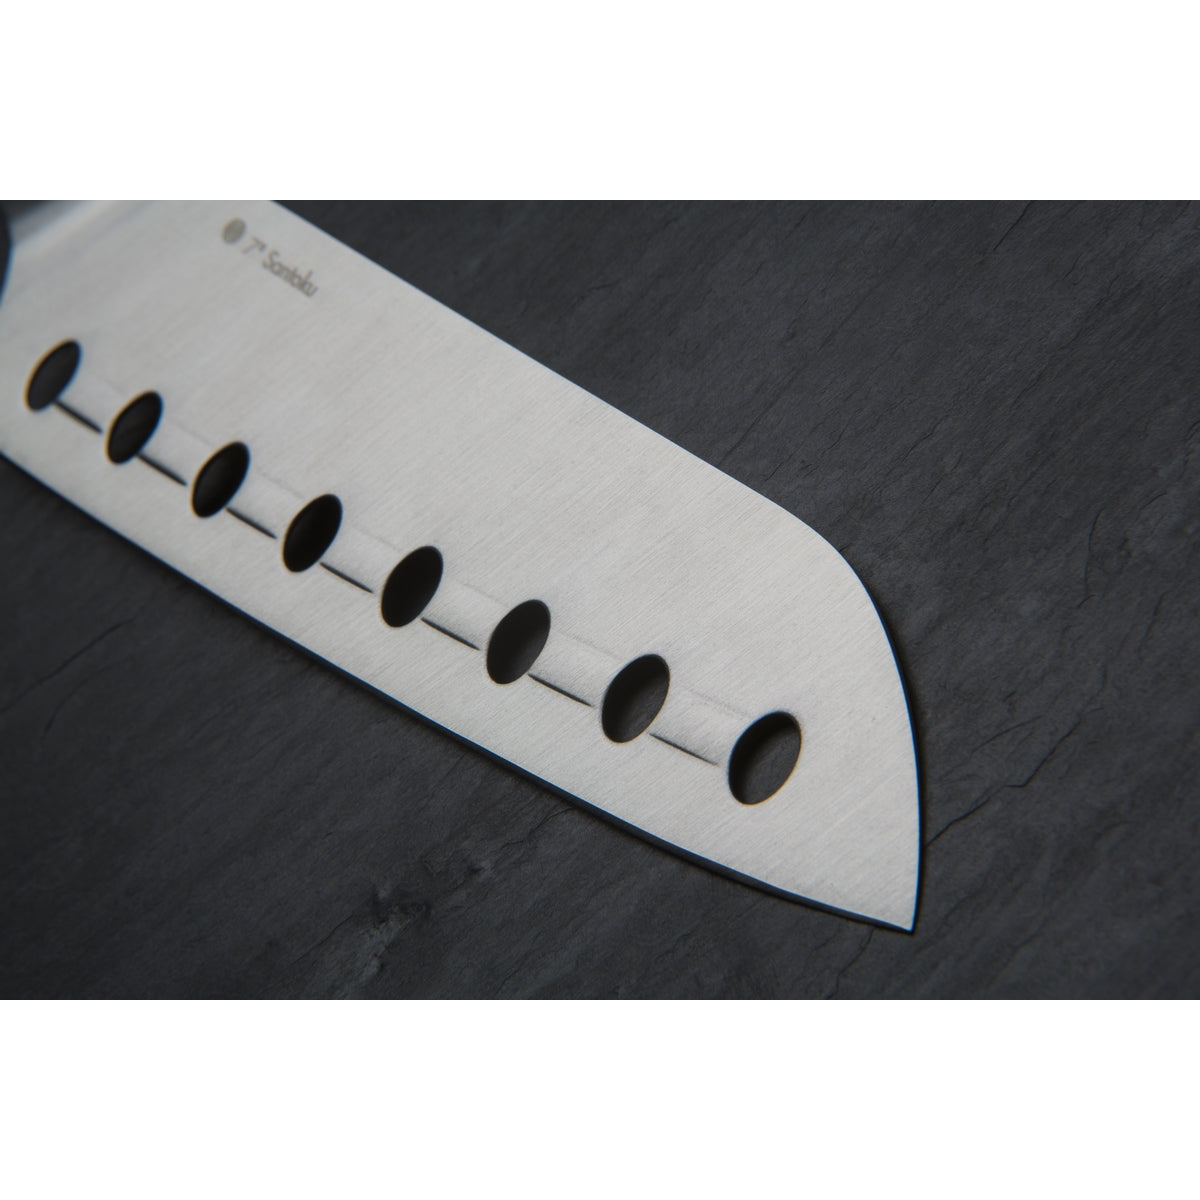 Close up of unique hole-and-ridge technology on the blade of the Circulon Santoku Knife